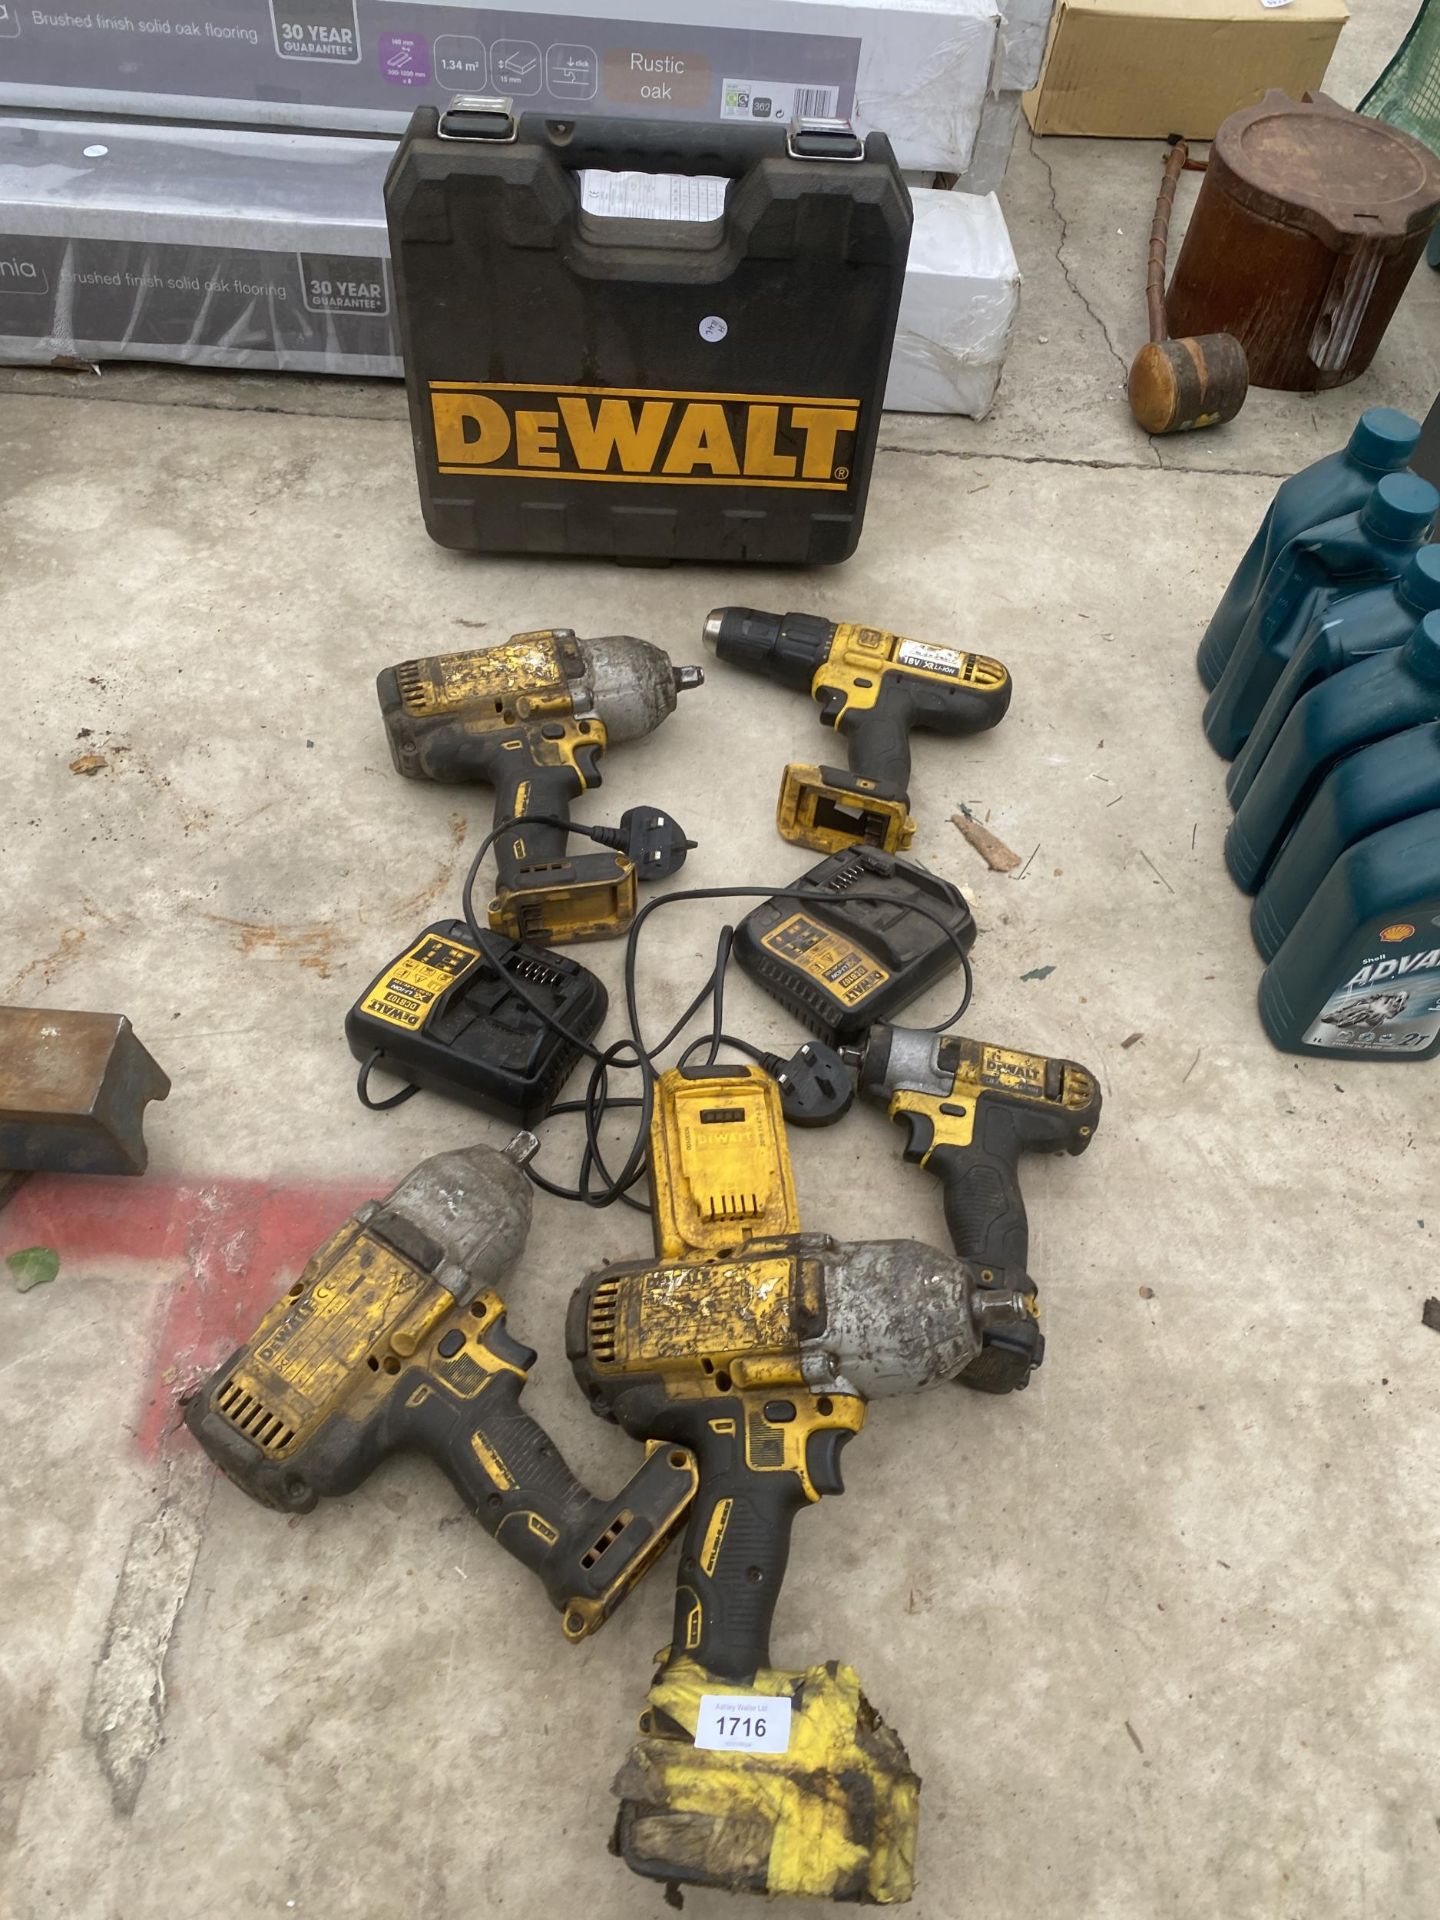 FIVE VARIOUS DEWALT POWER TOOLS TO INCLUDE DRILLS AND IMPACT WRENCHES ETC WITH CHARGERS AND CASE ETC